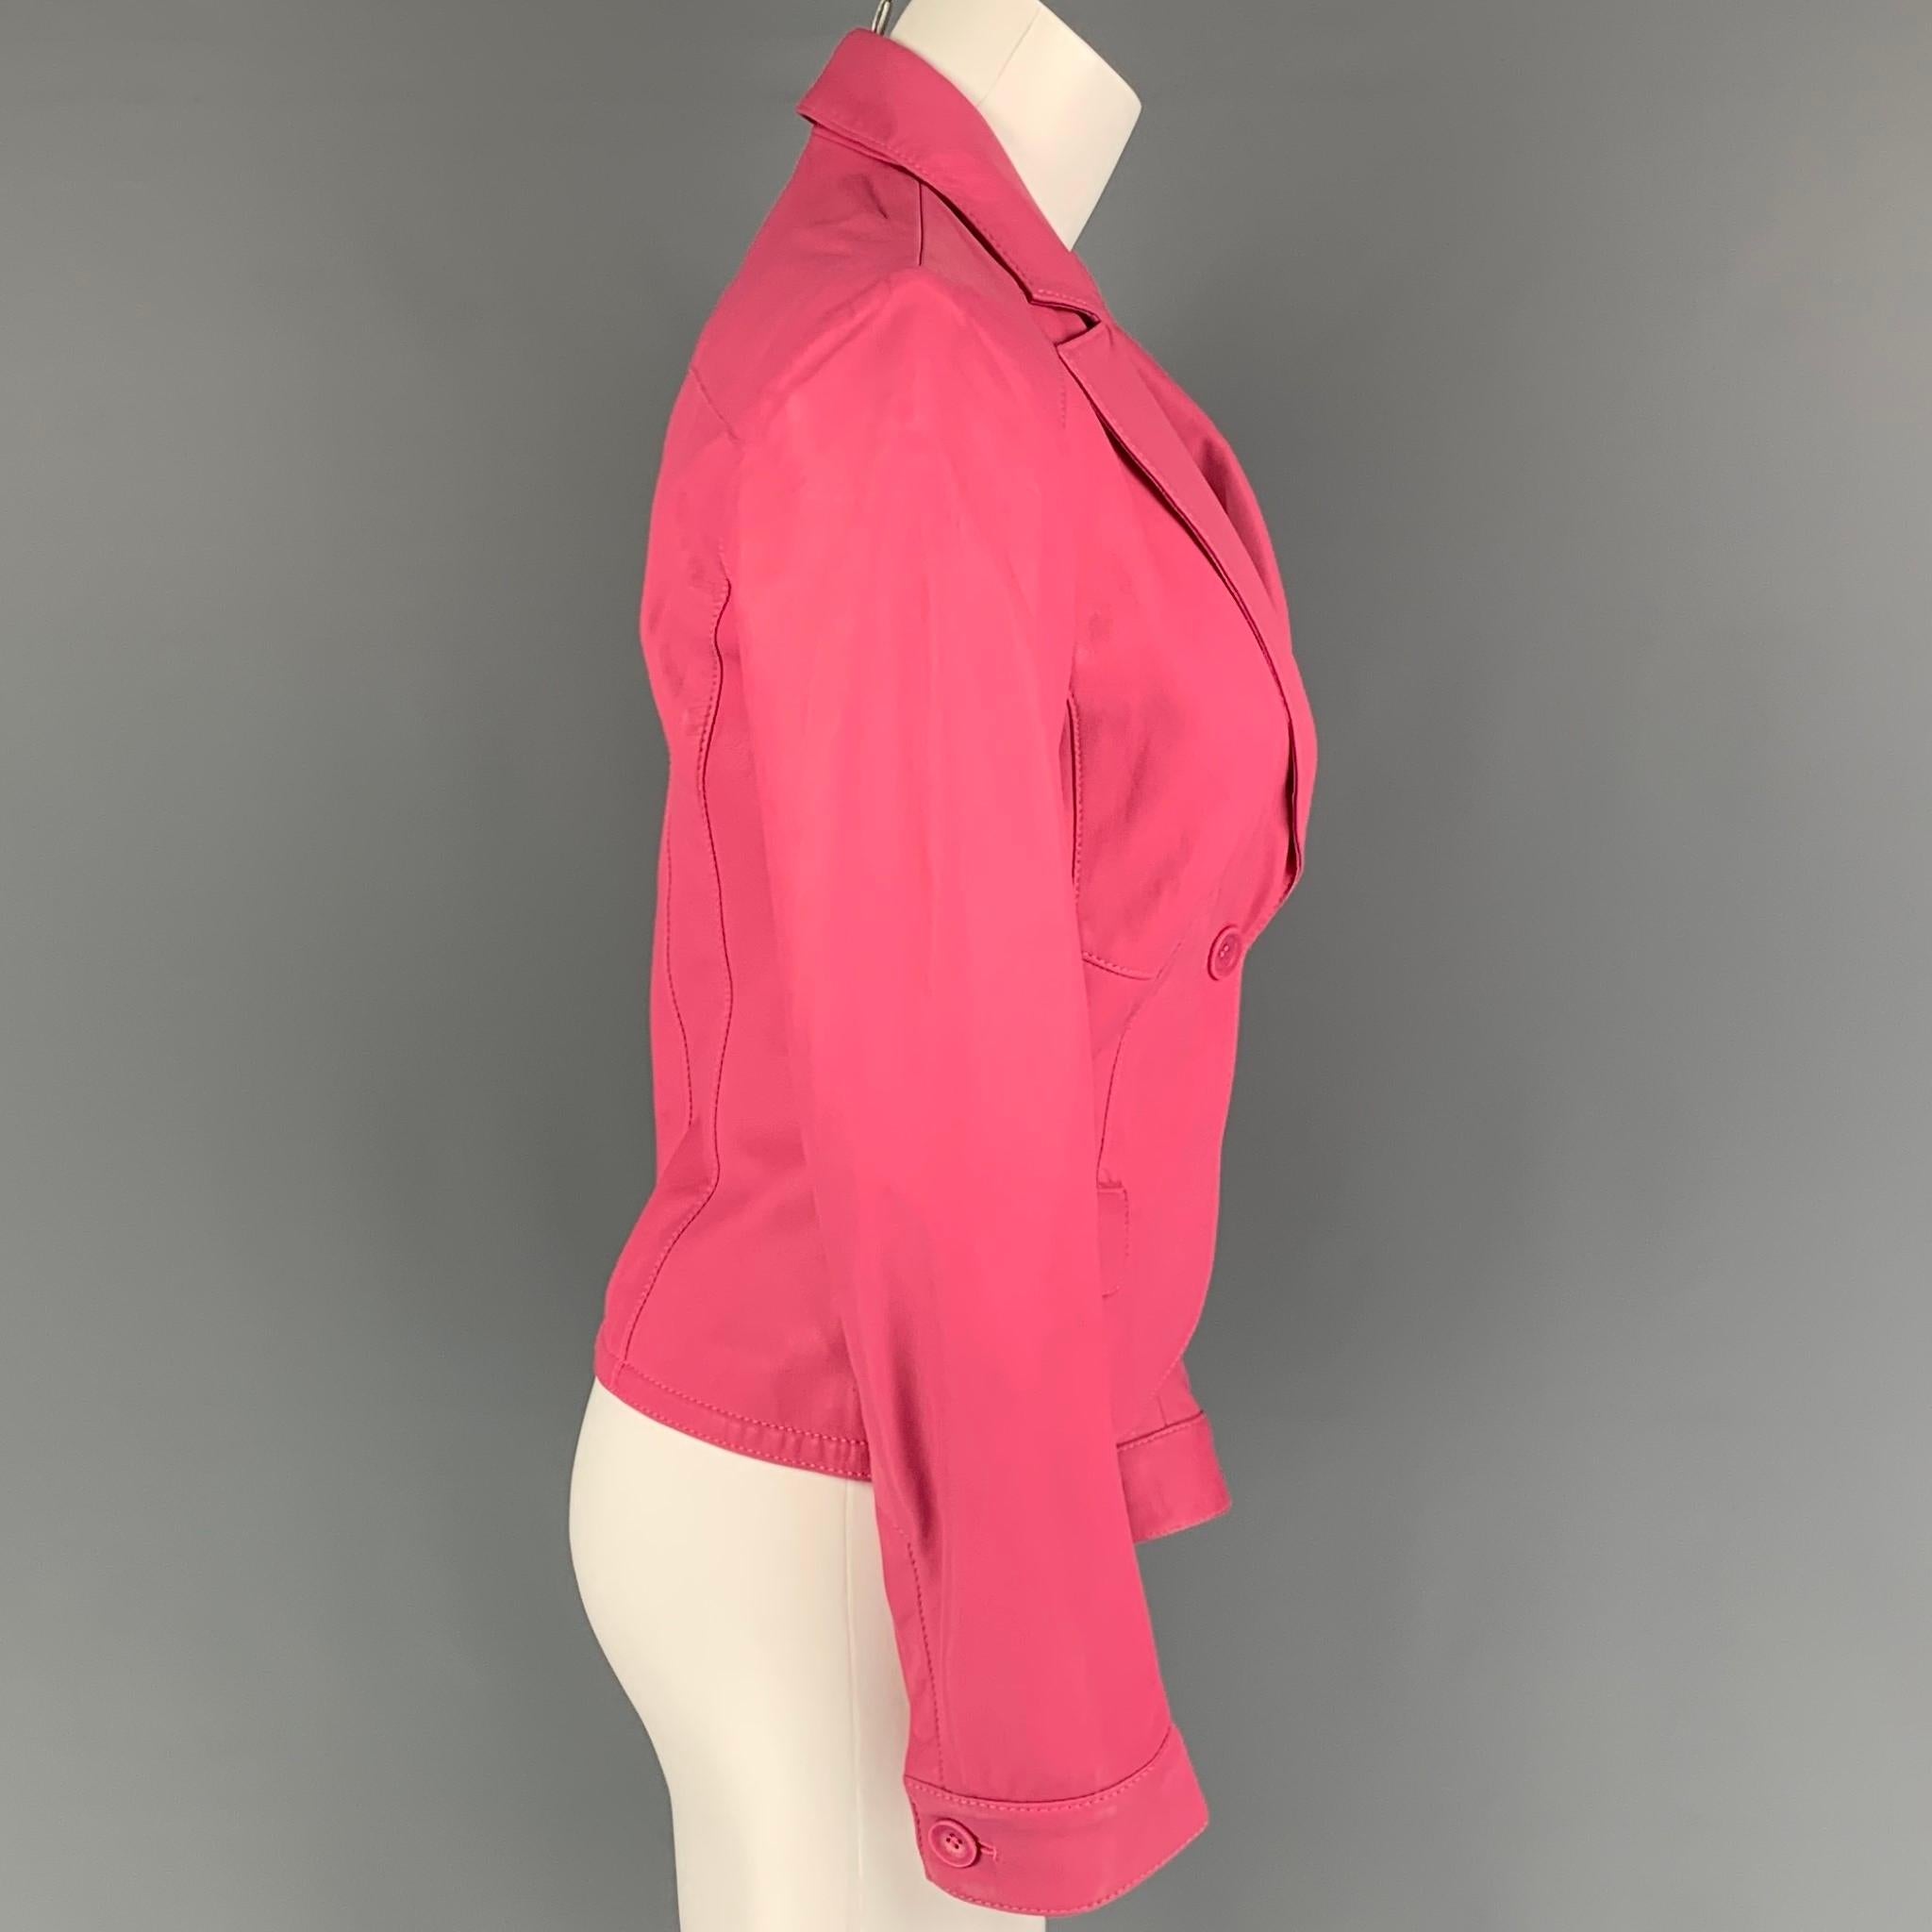 PAUL & SHARK jacket comes in a pink leather with a floral liner featuring a notch lapel, flap pockets, top stitching, and a single button closure. 

Very Good Pre-Owned Condition.
Marked: XS

Measurements:

Shoulder: 15 in.
Bust: 34 in.
Sleeve: 24.5